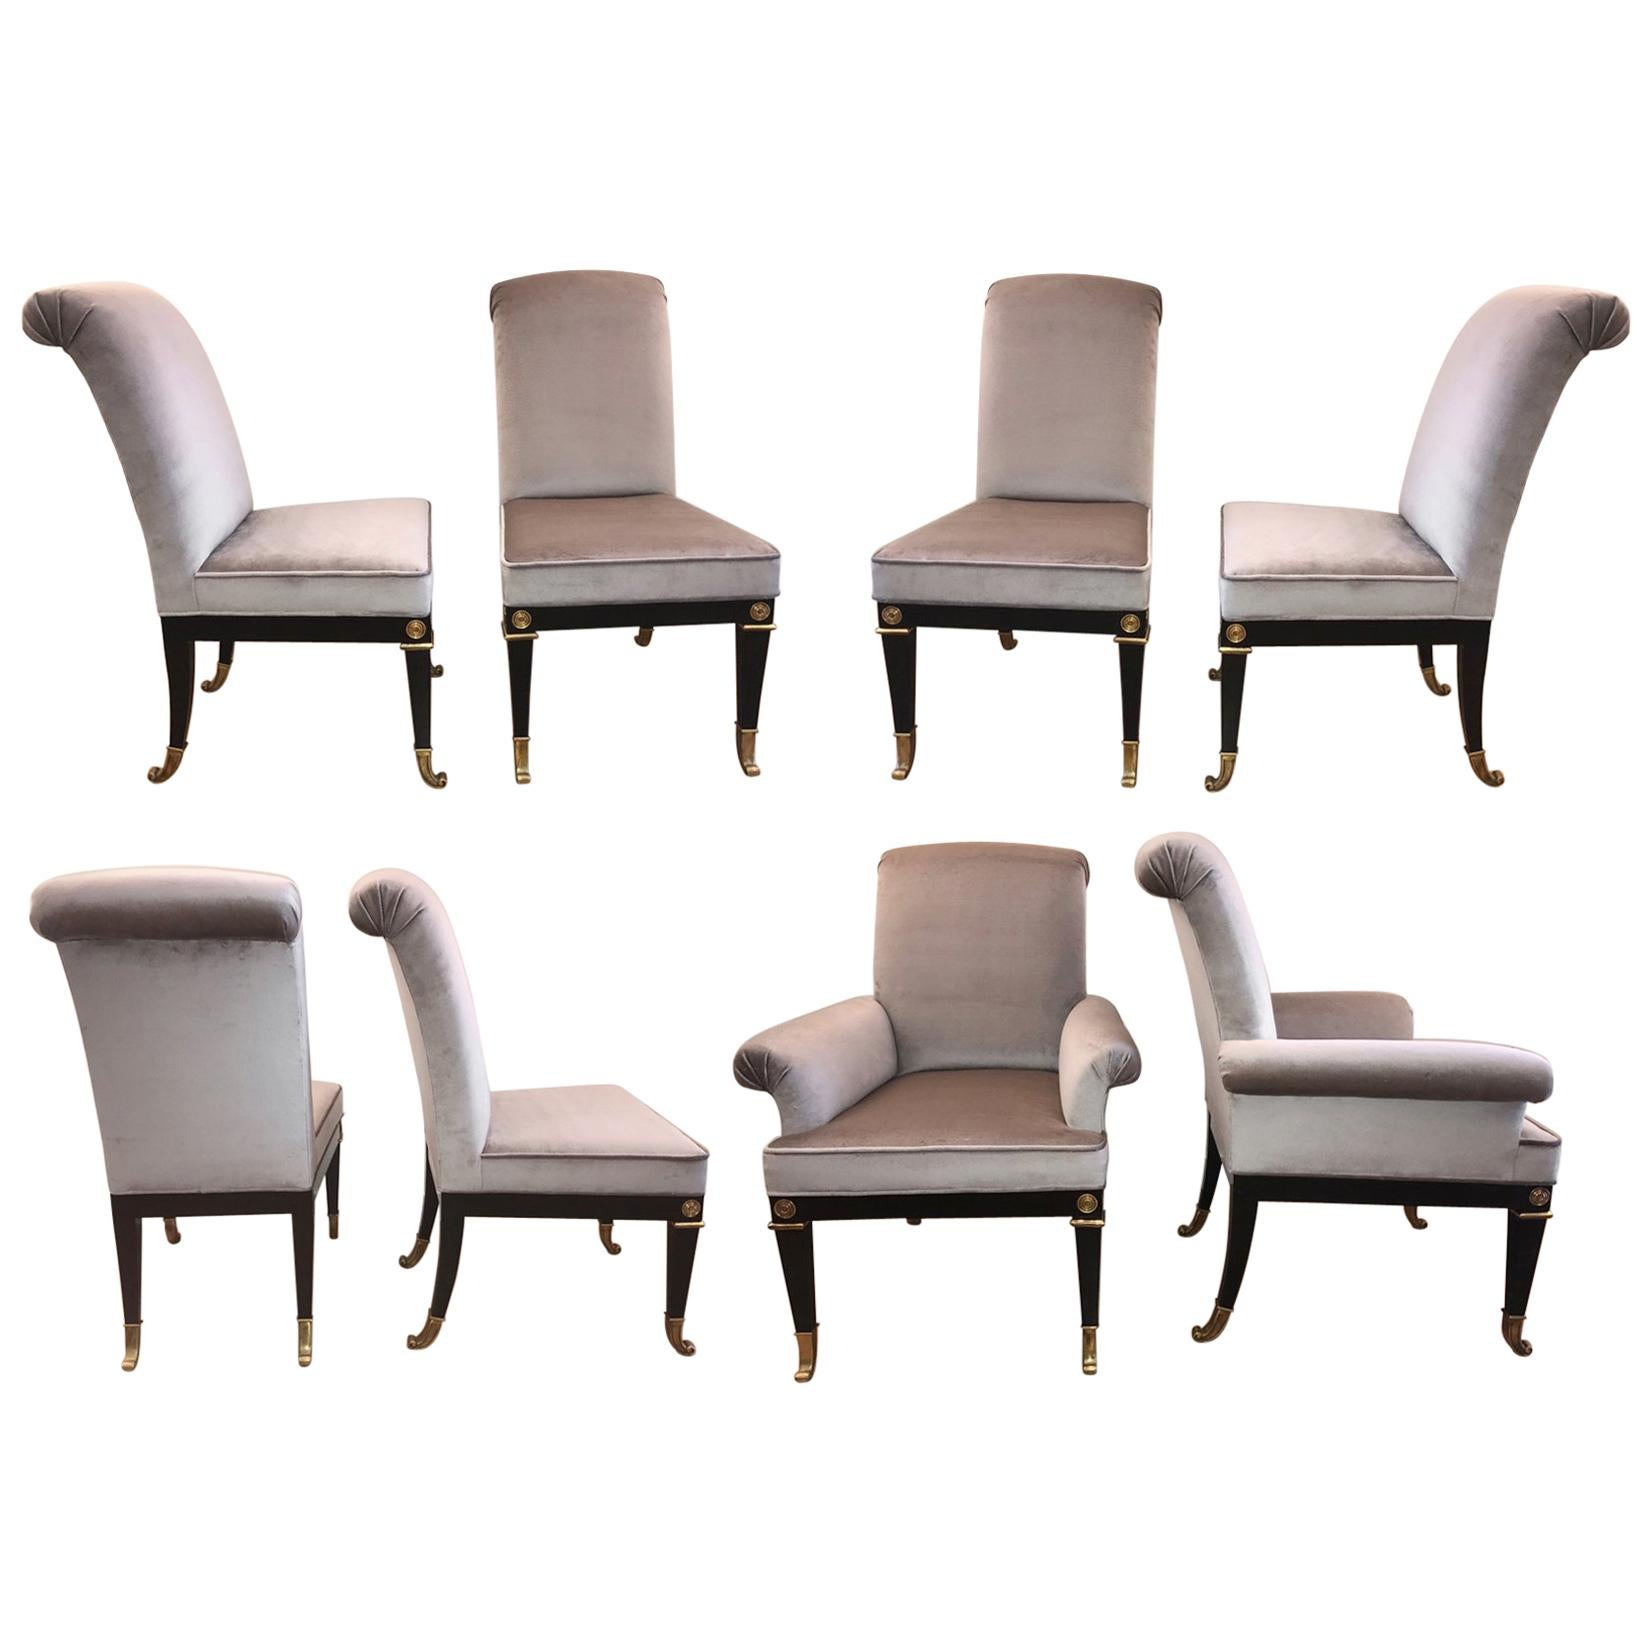 Eight Neoclassical Style Dining Room Chairs by Mastercraft